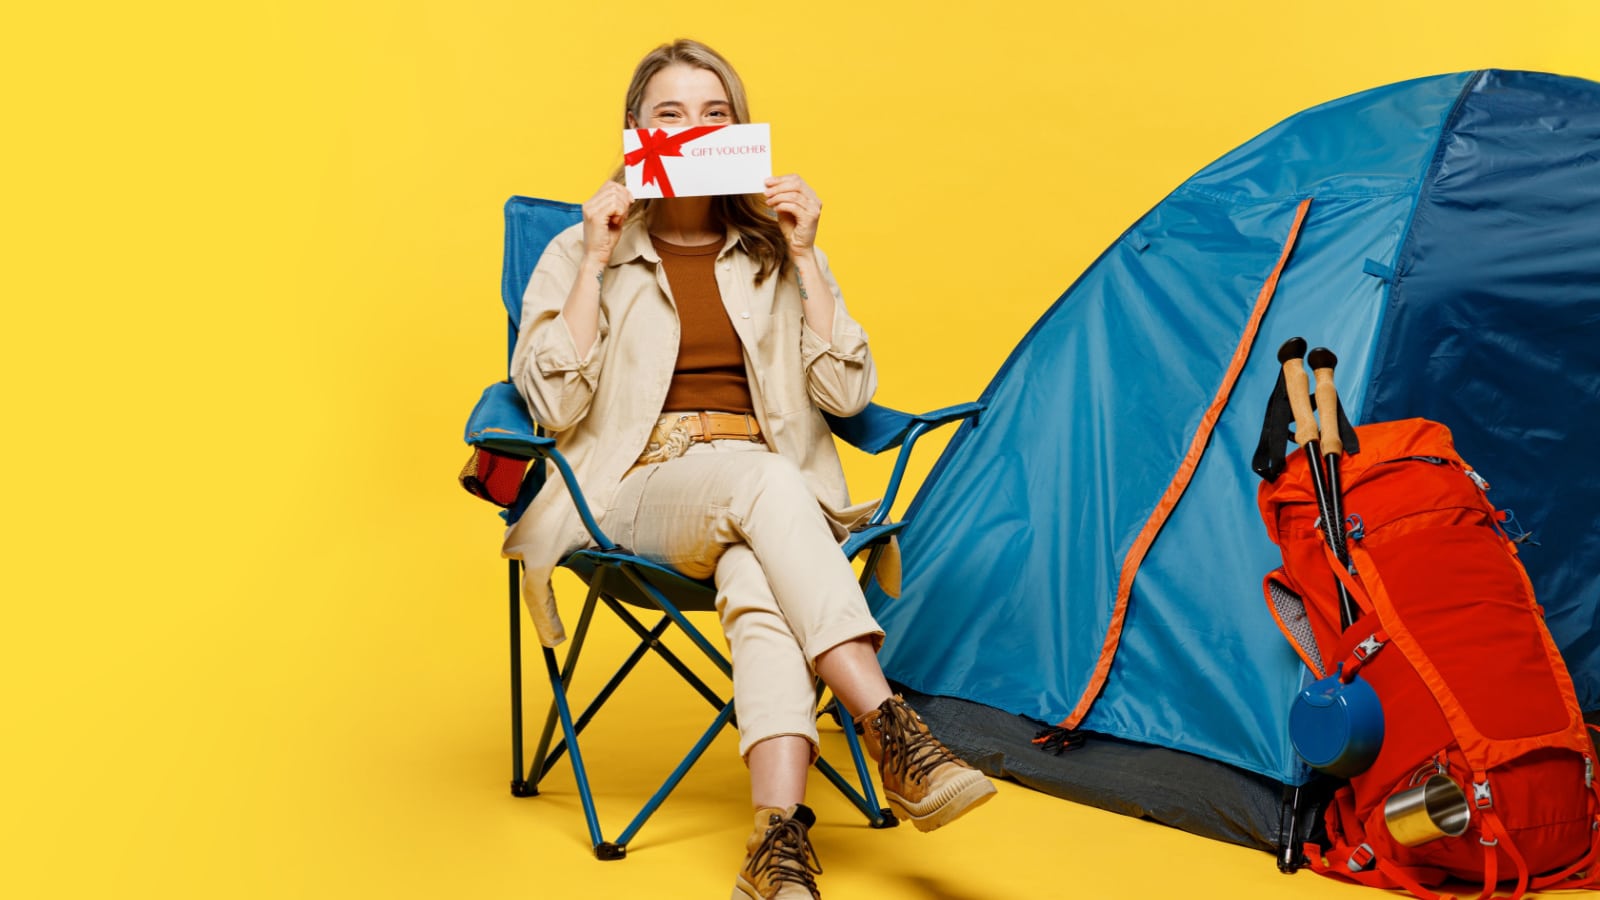 Full body young woman sit near bag with stuff tent hold gift coupon voucher isolated on plain yellow background. Tourist leads active lifestyle walk on spare time. Hiking trek rest travel trip concept